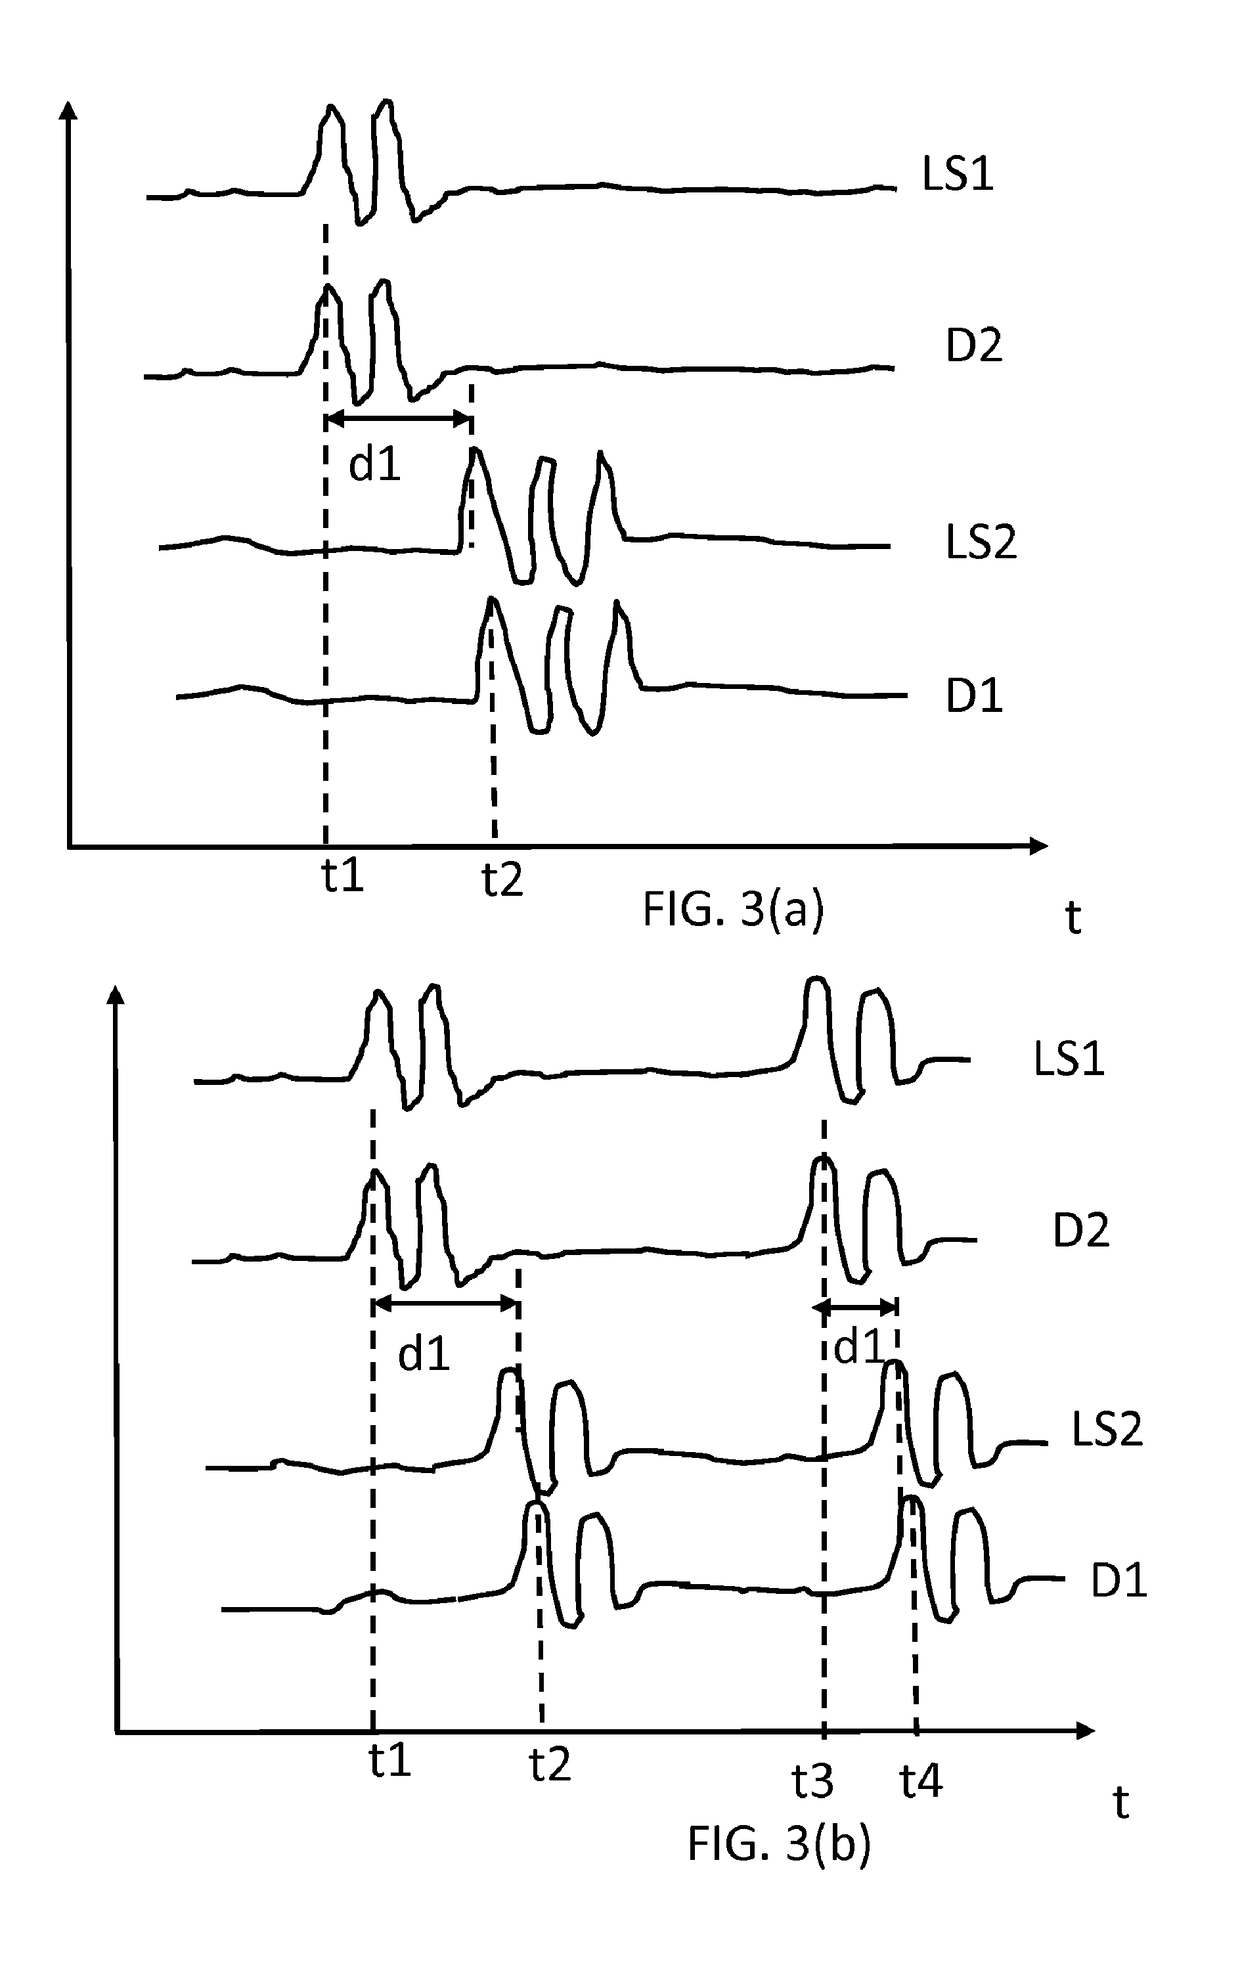 Sensor system and method which makes use of multiple ppg sensors